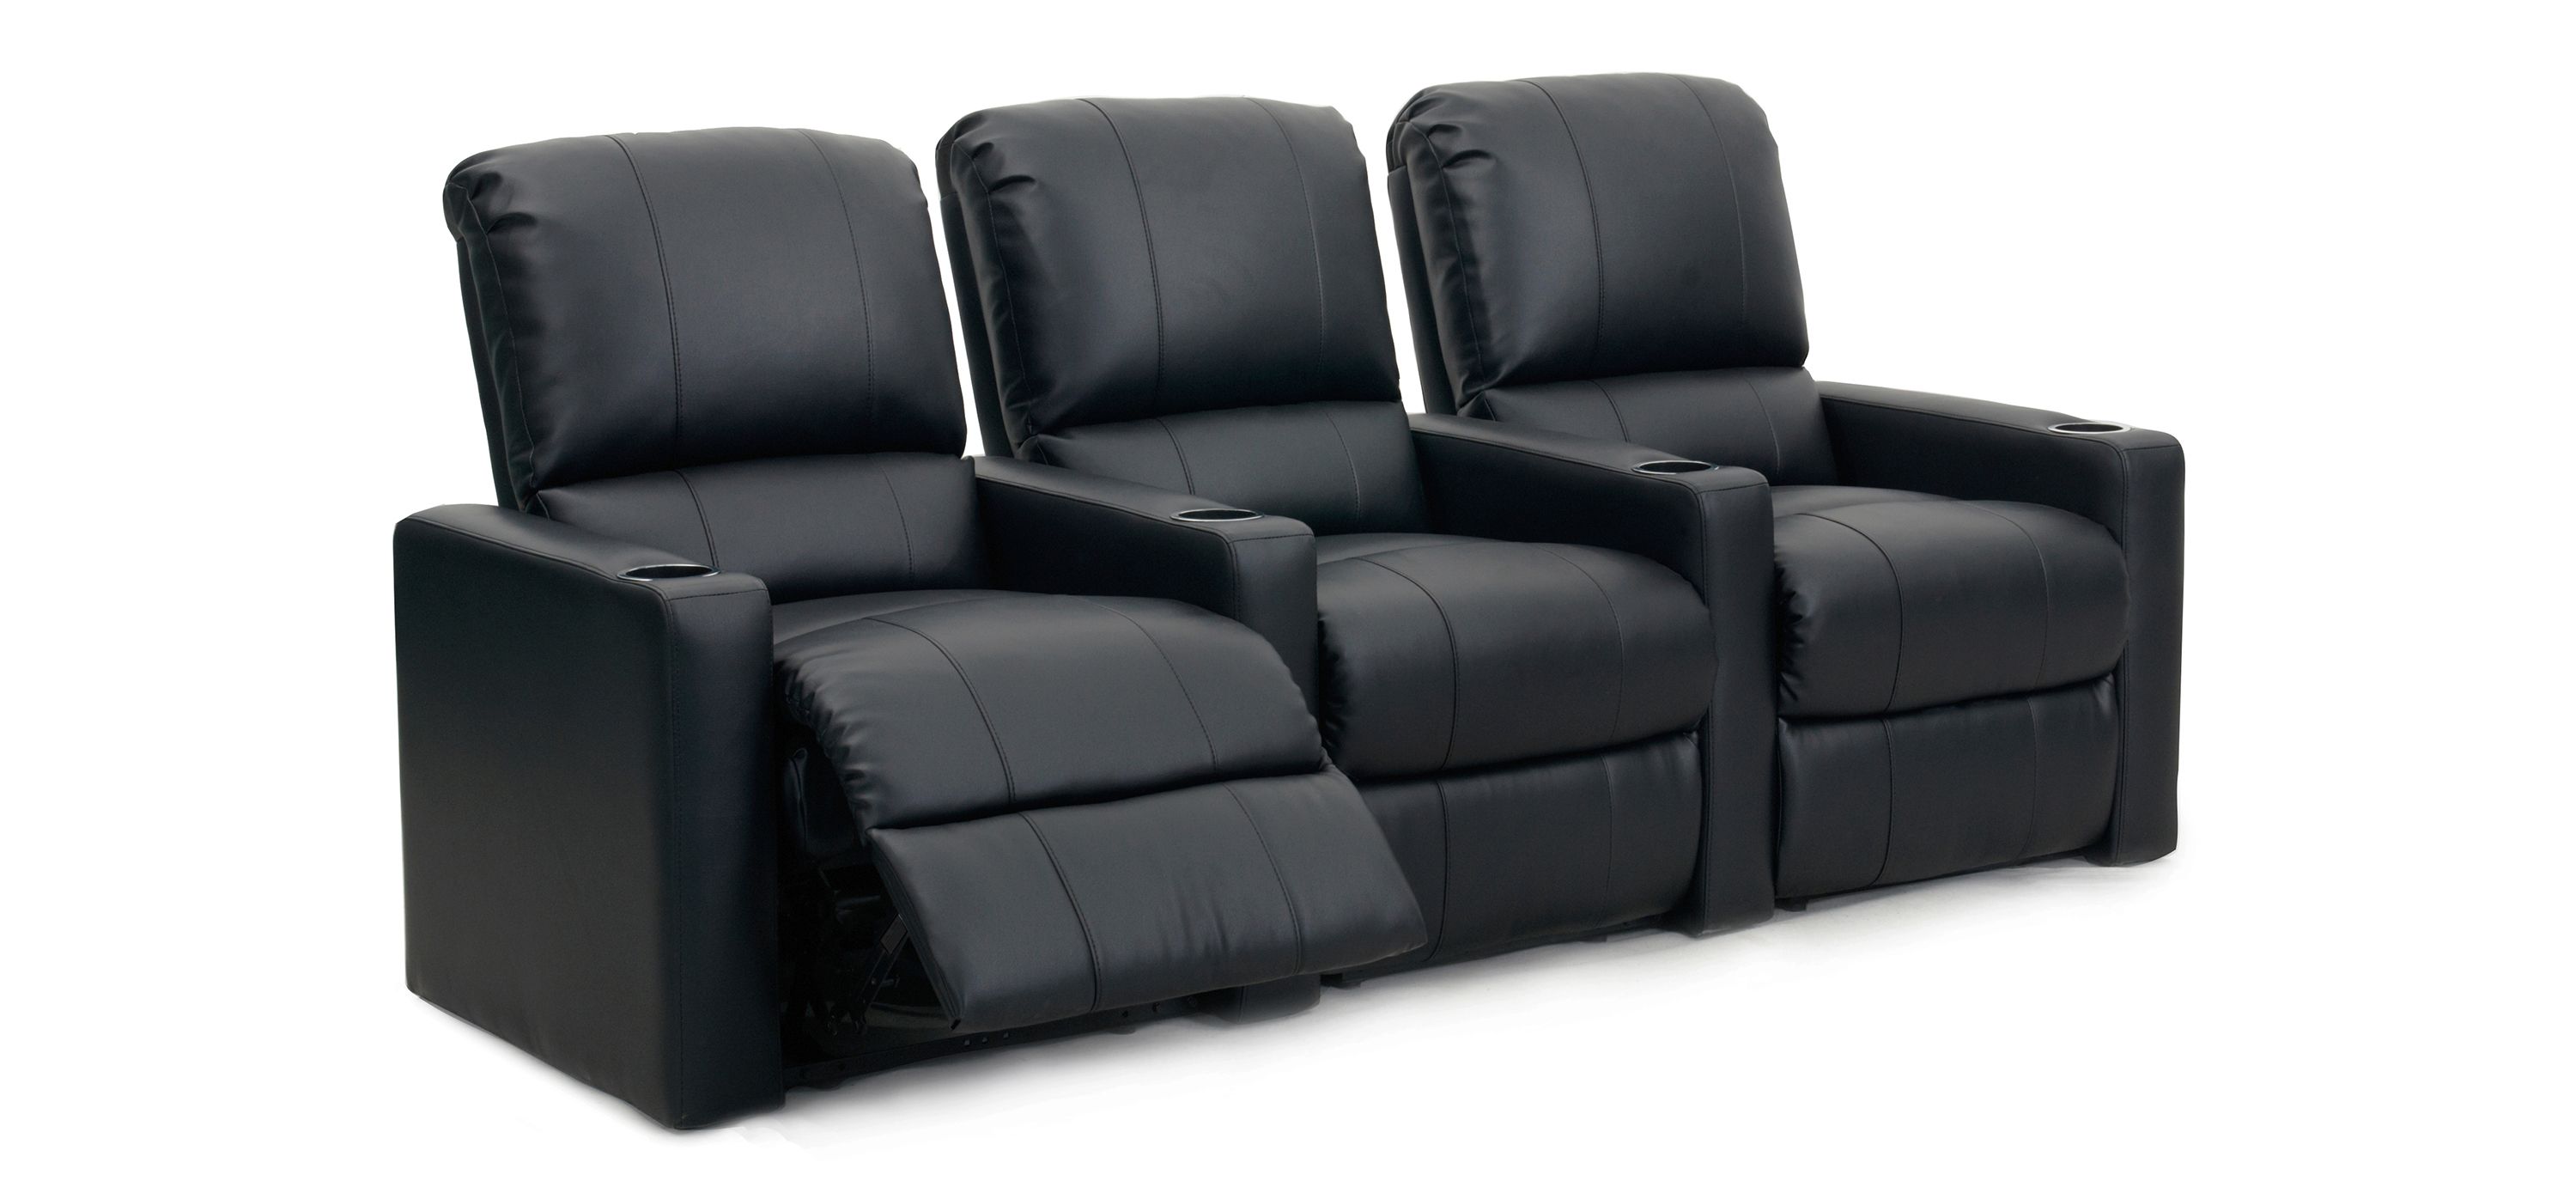 Chicago 3-pc. Leather Reclining Sectional Sofa